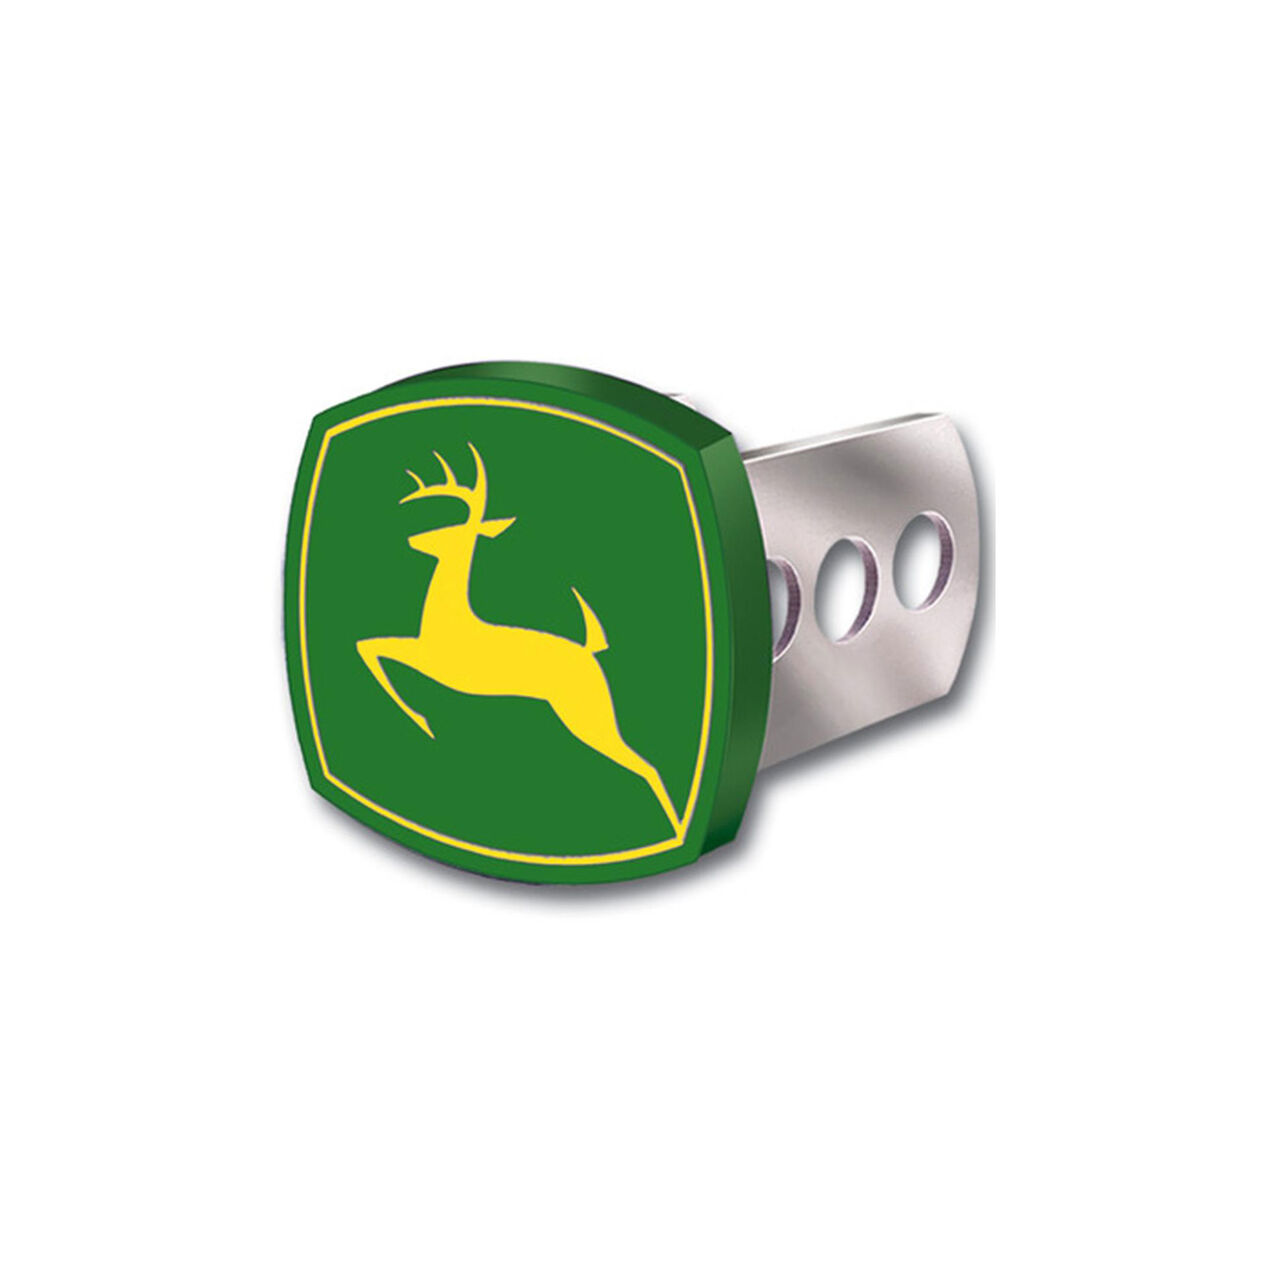 Full Color Metal Hitch Cover - LP66209,  image number 0